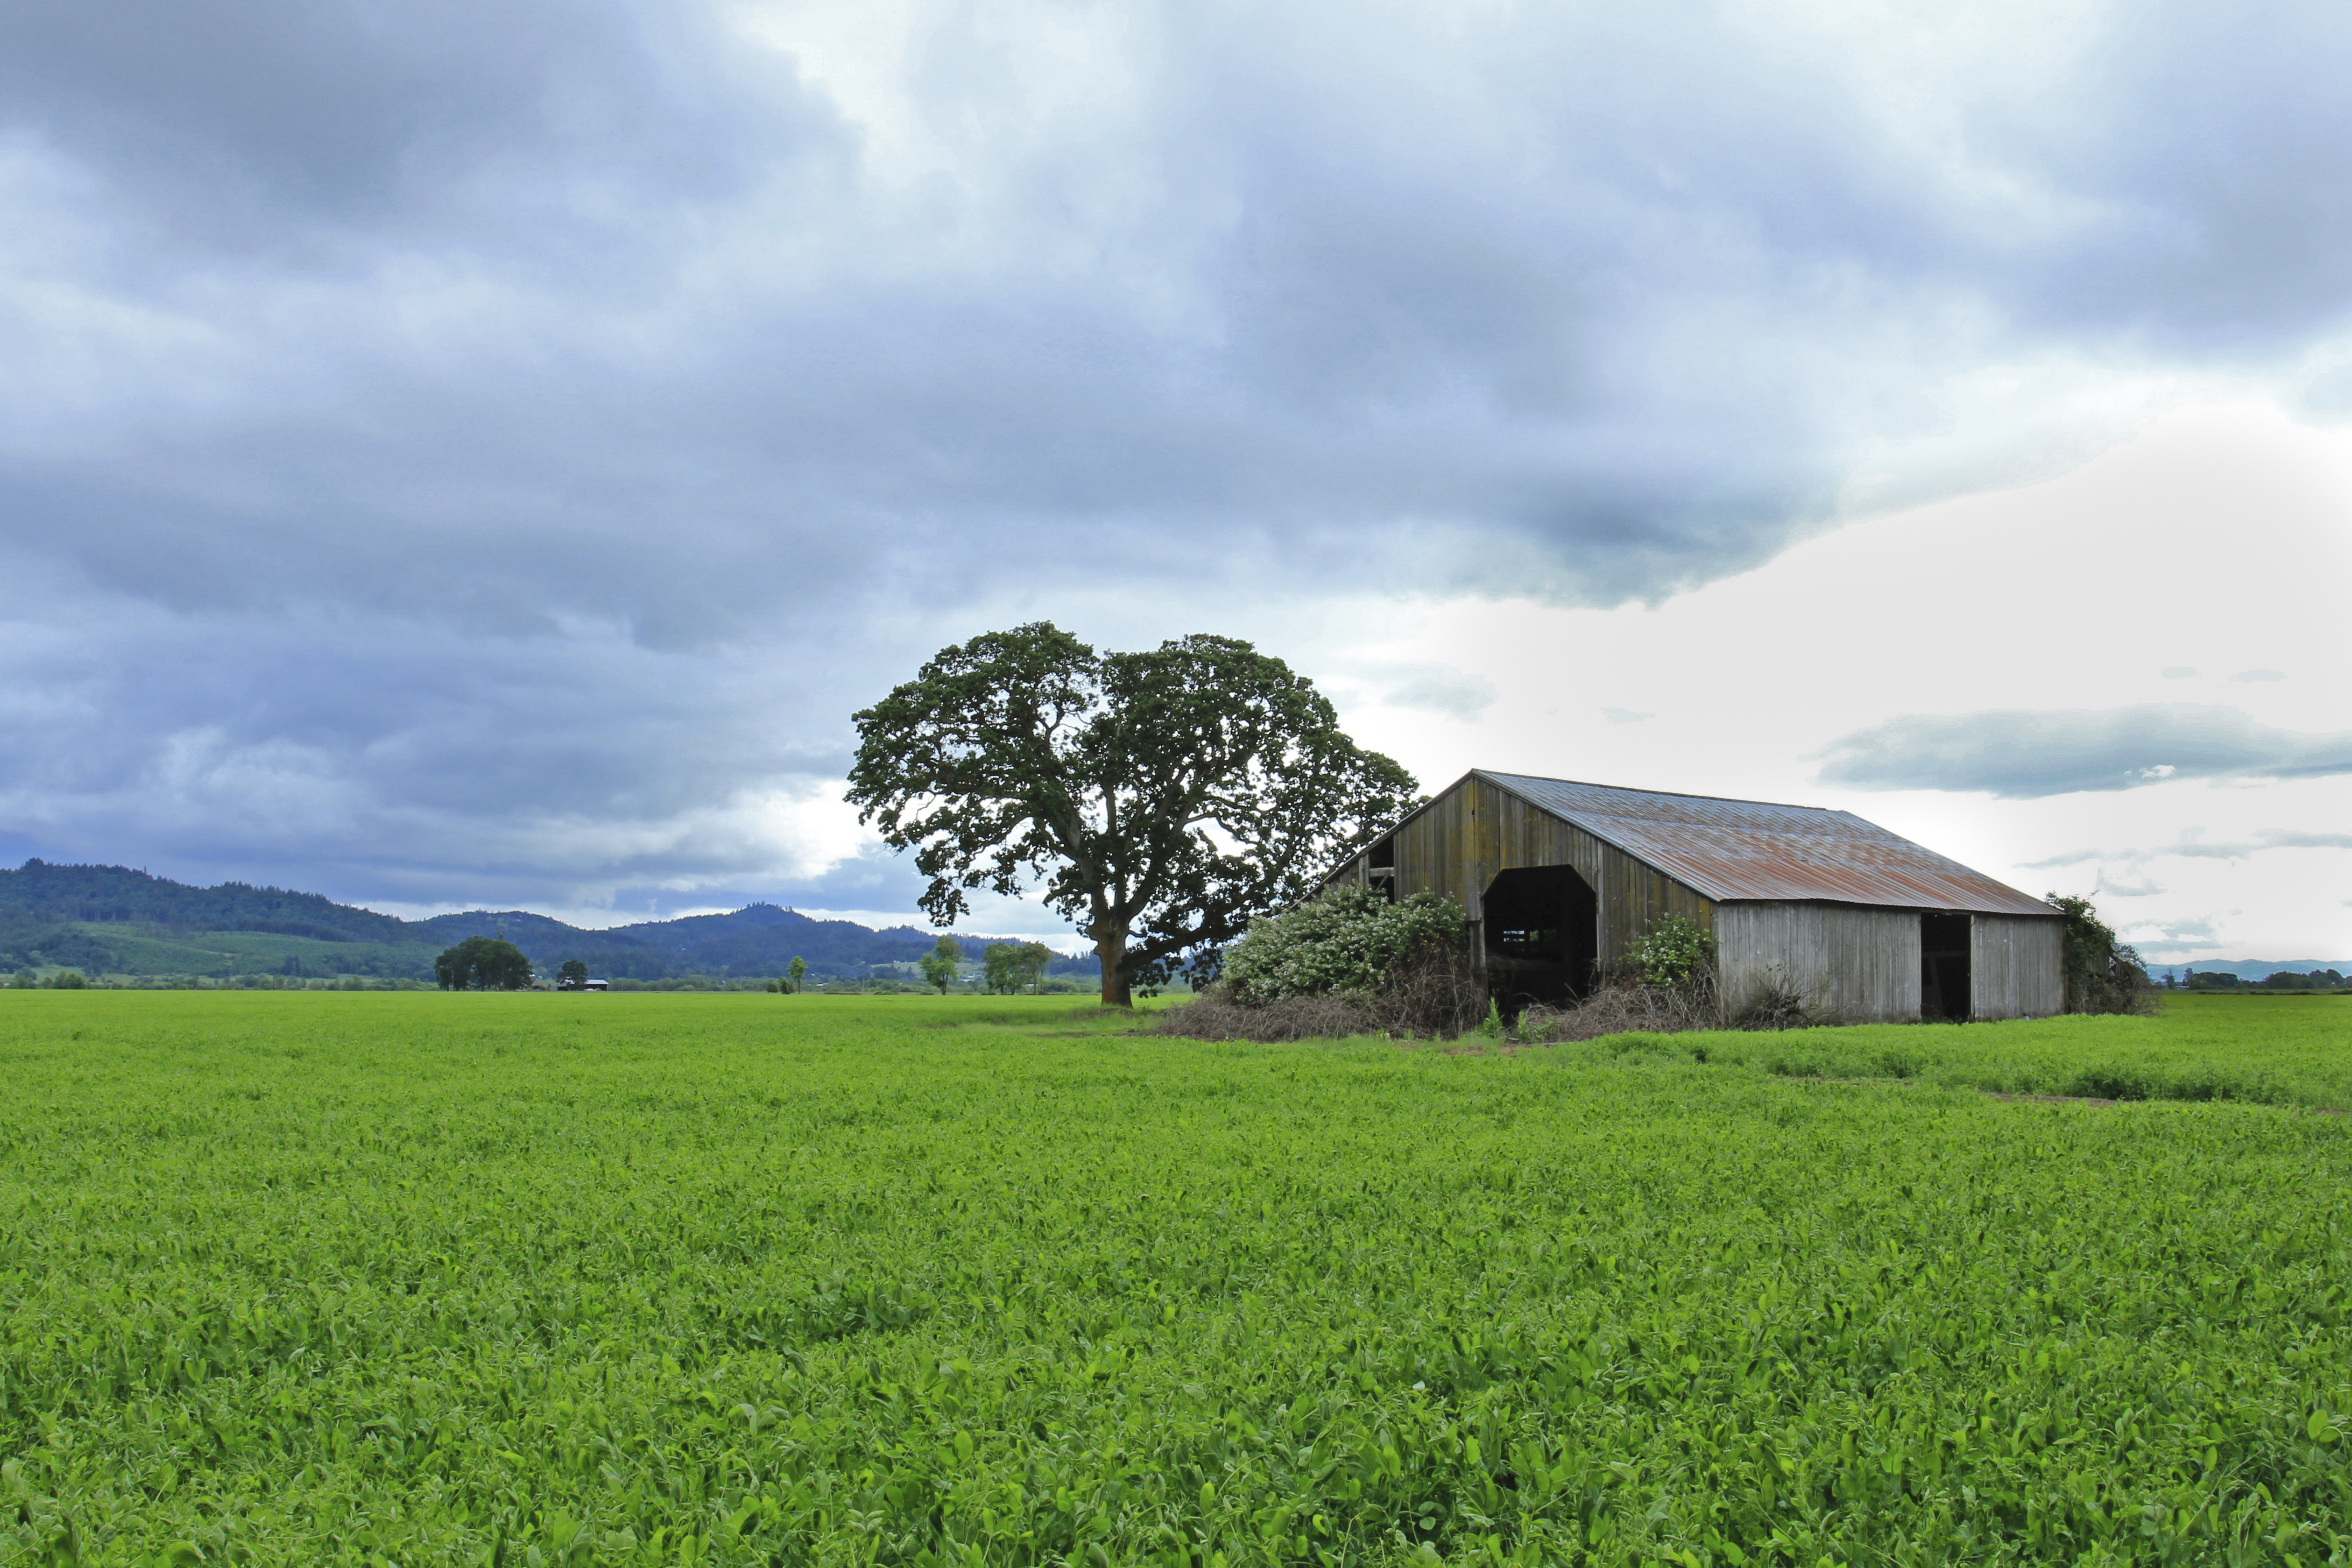 Old barn, stormy skies, green field, Oregon, Abandoned, Barn, Clouds, Field, HQ Photo